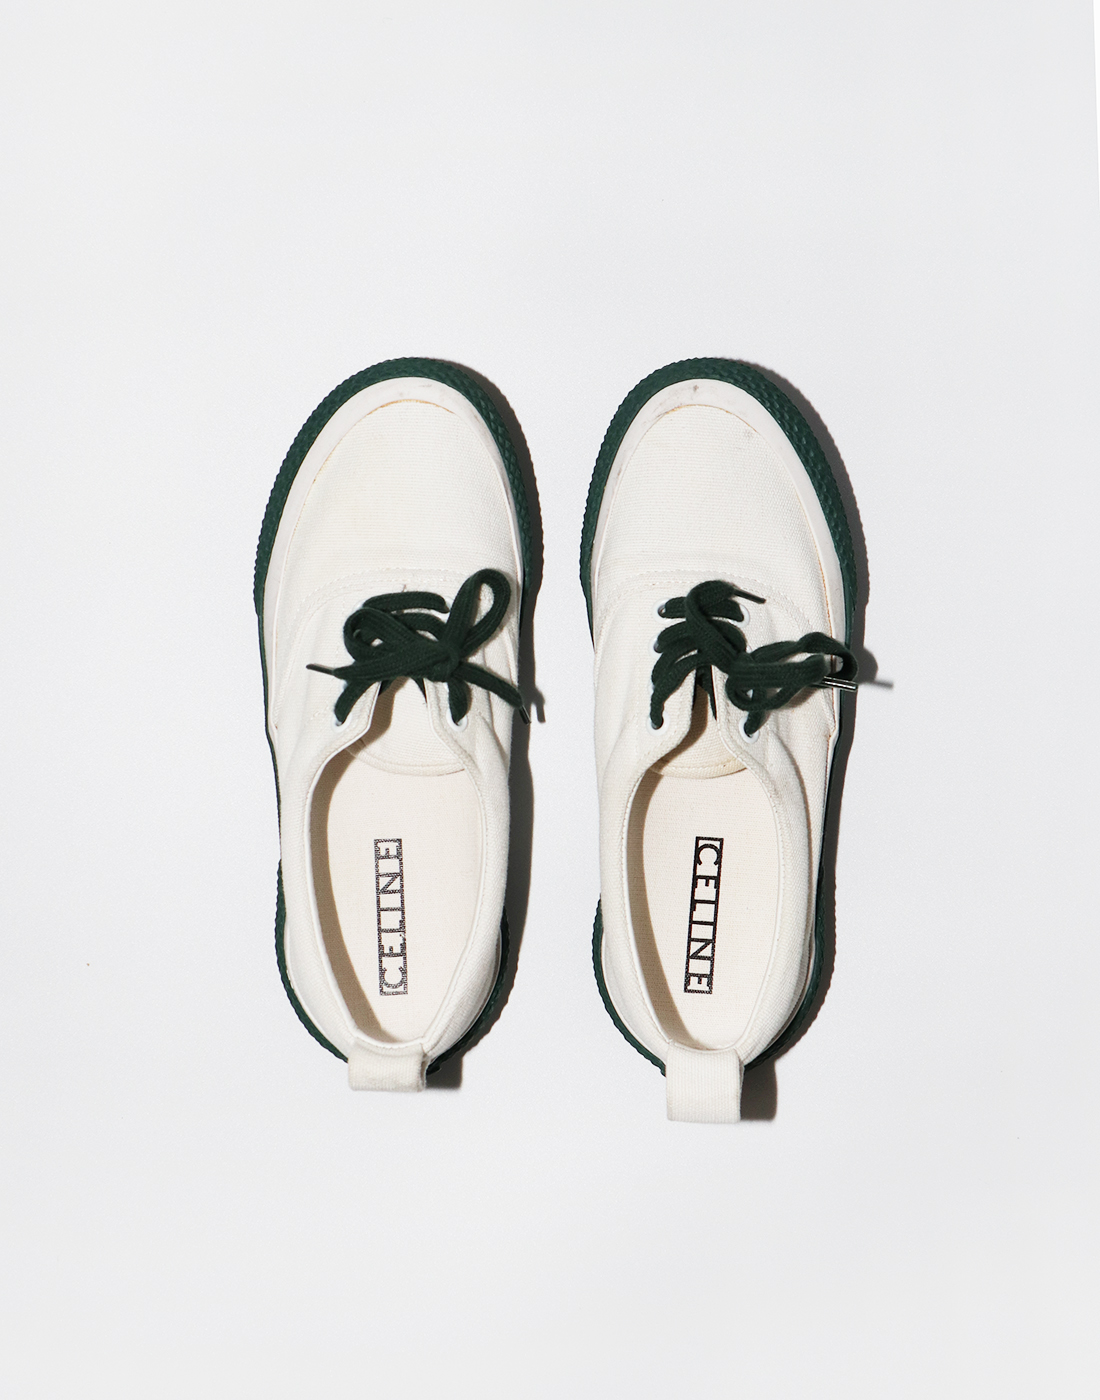 CELINE Old Celine Canvas Lace-Up Sneakers, White/Green